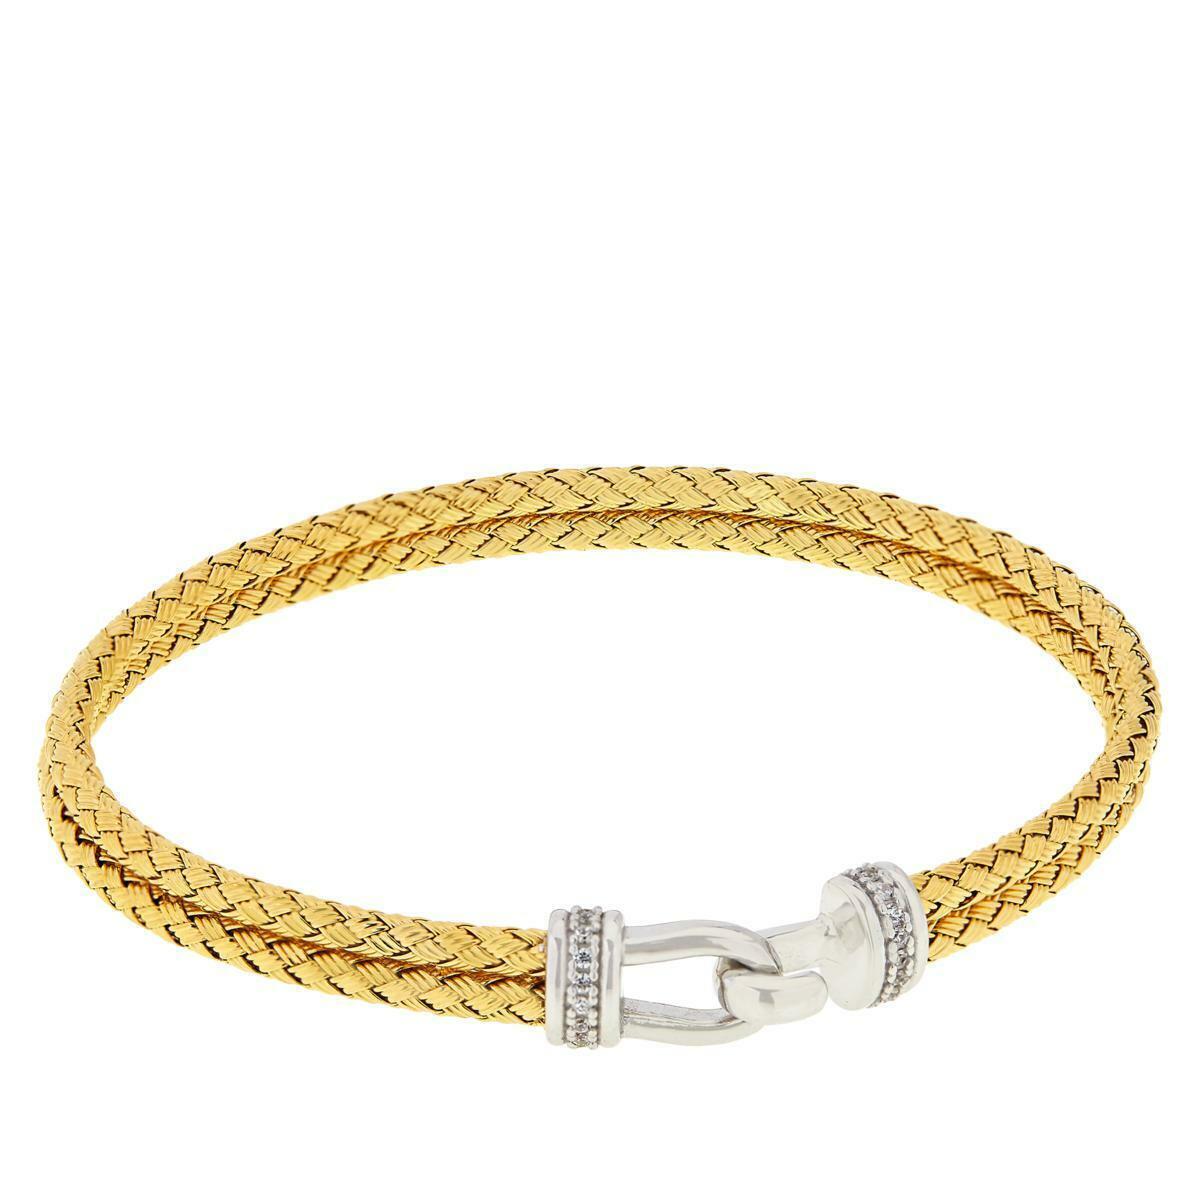 Bellezza Yellow Gold Plated Sterling Silver CZ Woven Buckle Bracelet, 6-1/4"